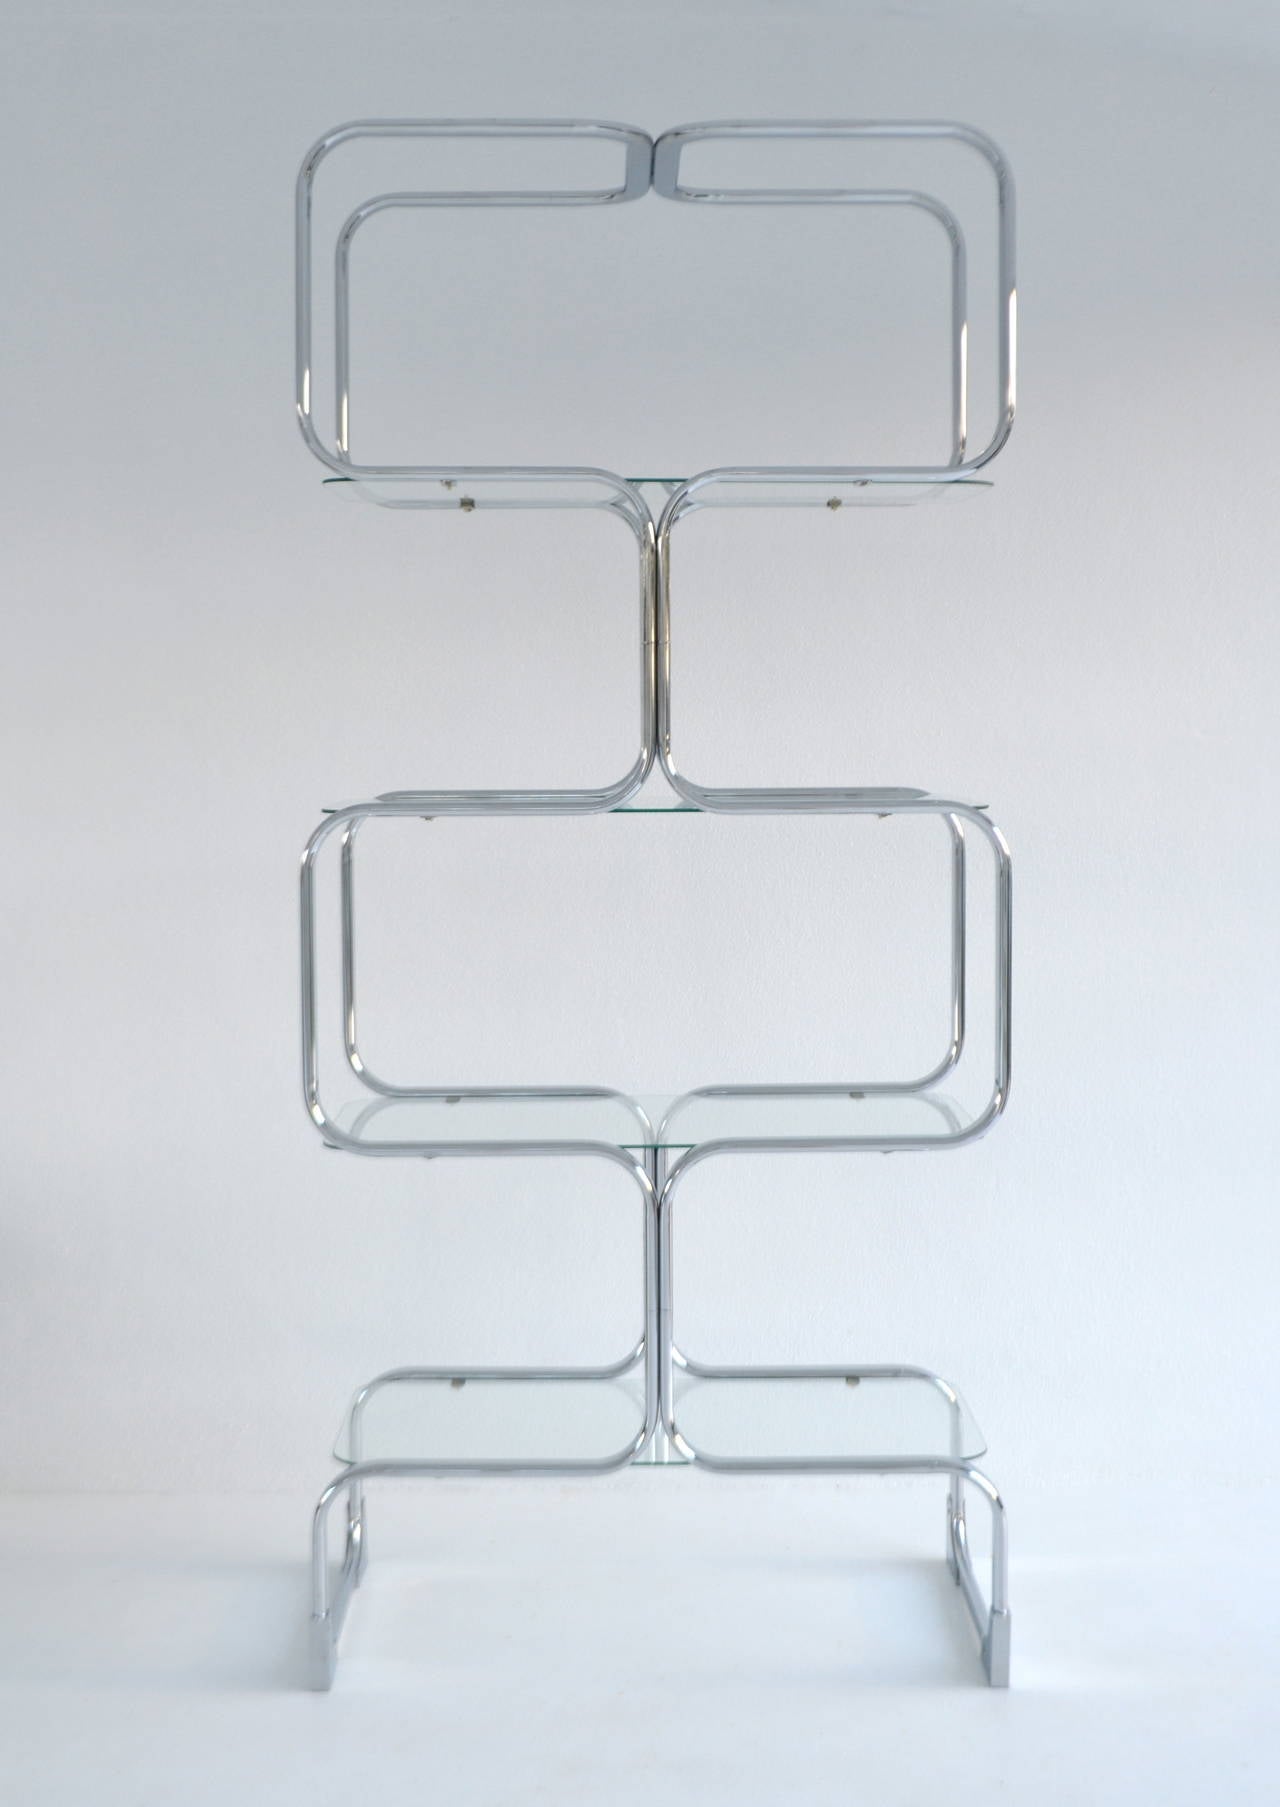 Strikingly graphic chrome etagere by Tricom, Italy, circa 1960s-1970s. This sleek Post-Modern bookshelf is designed and accented with four custom round cornered glass shelves.

Measurements:
Overall: 79